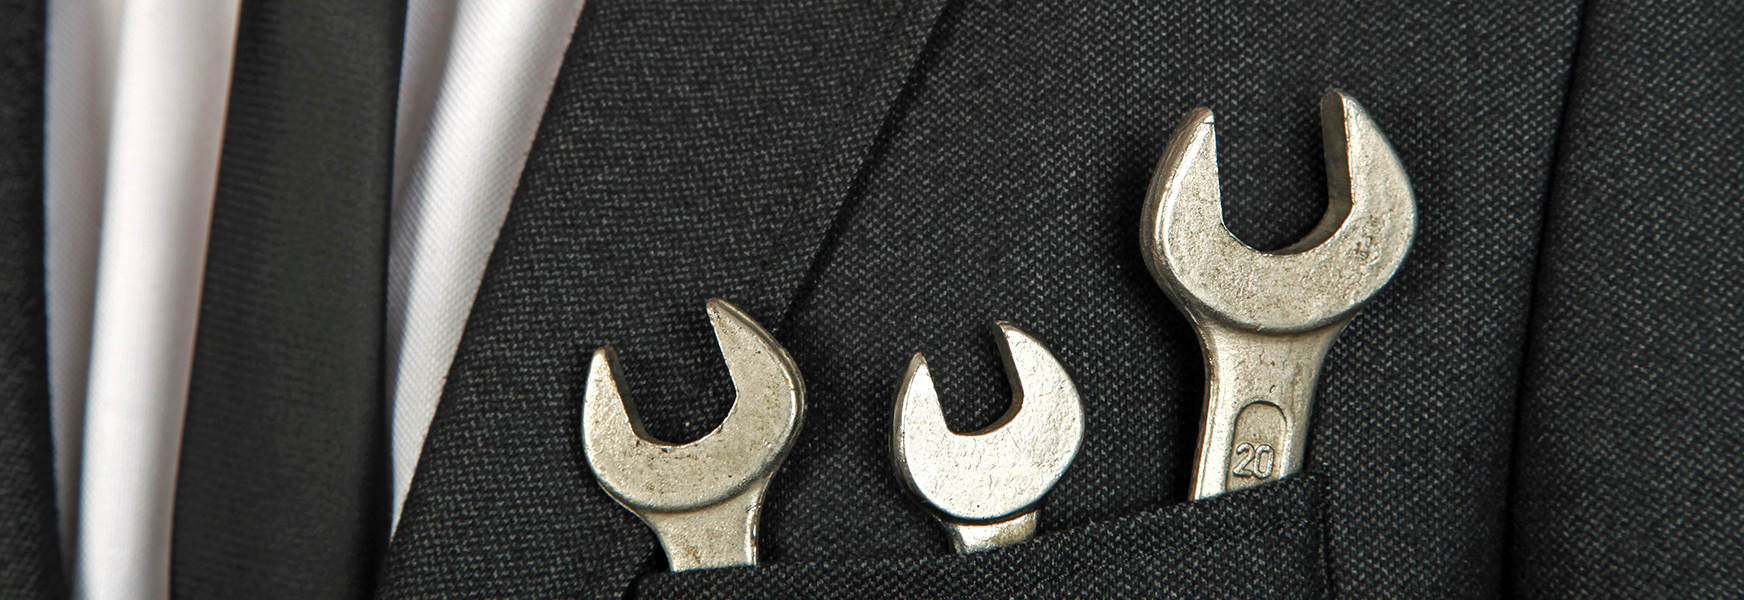 Wrenches in businessman's suit jacket pocket